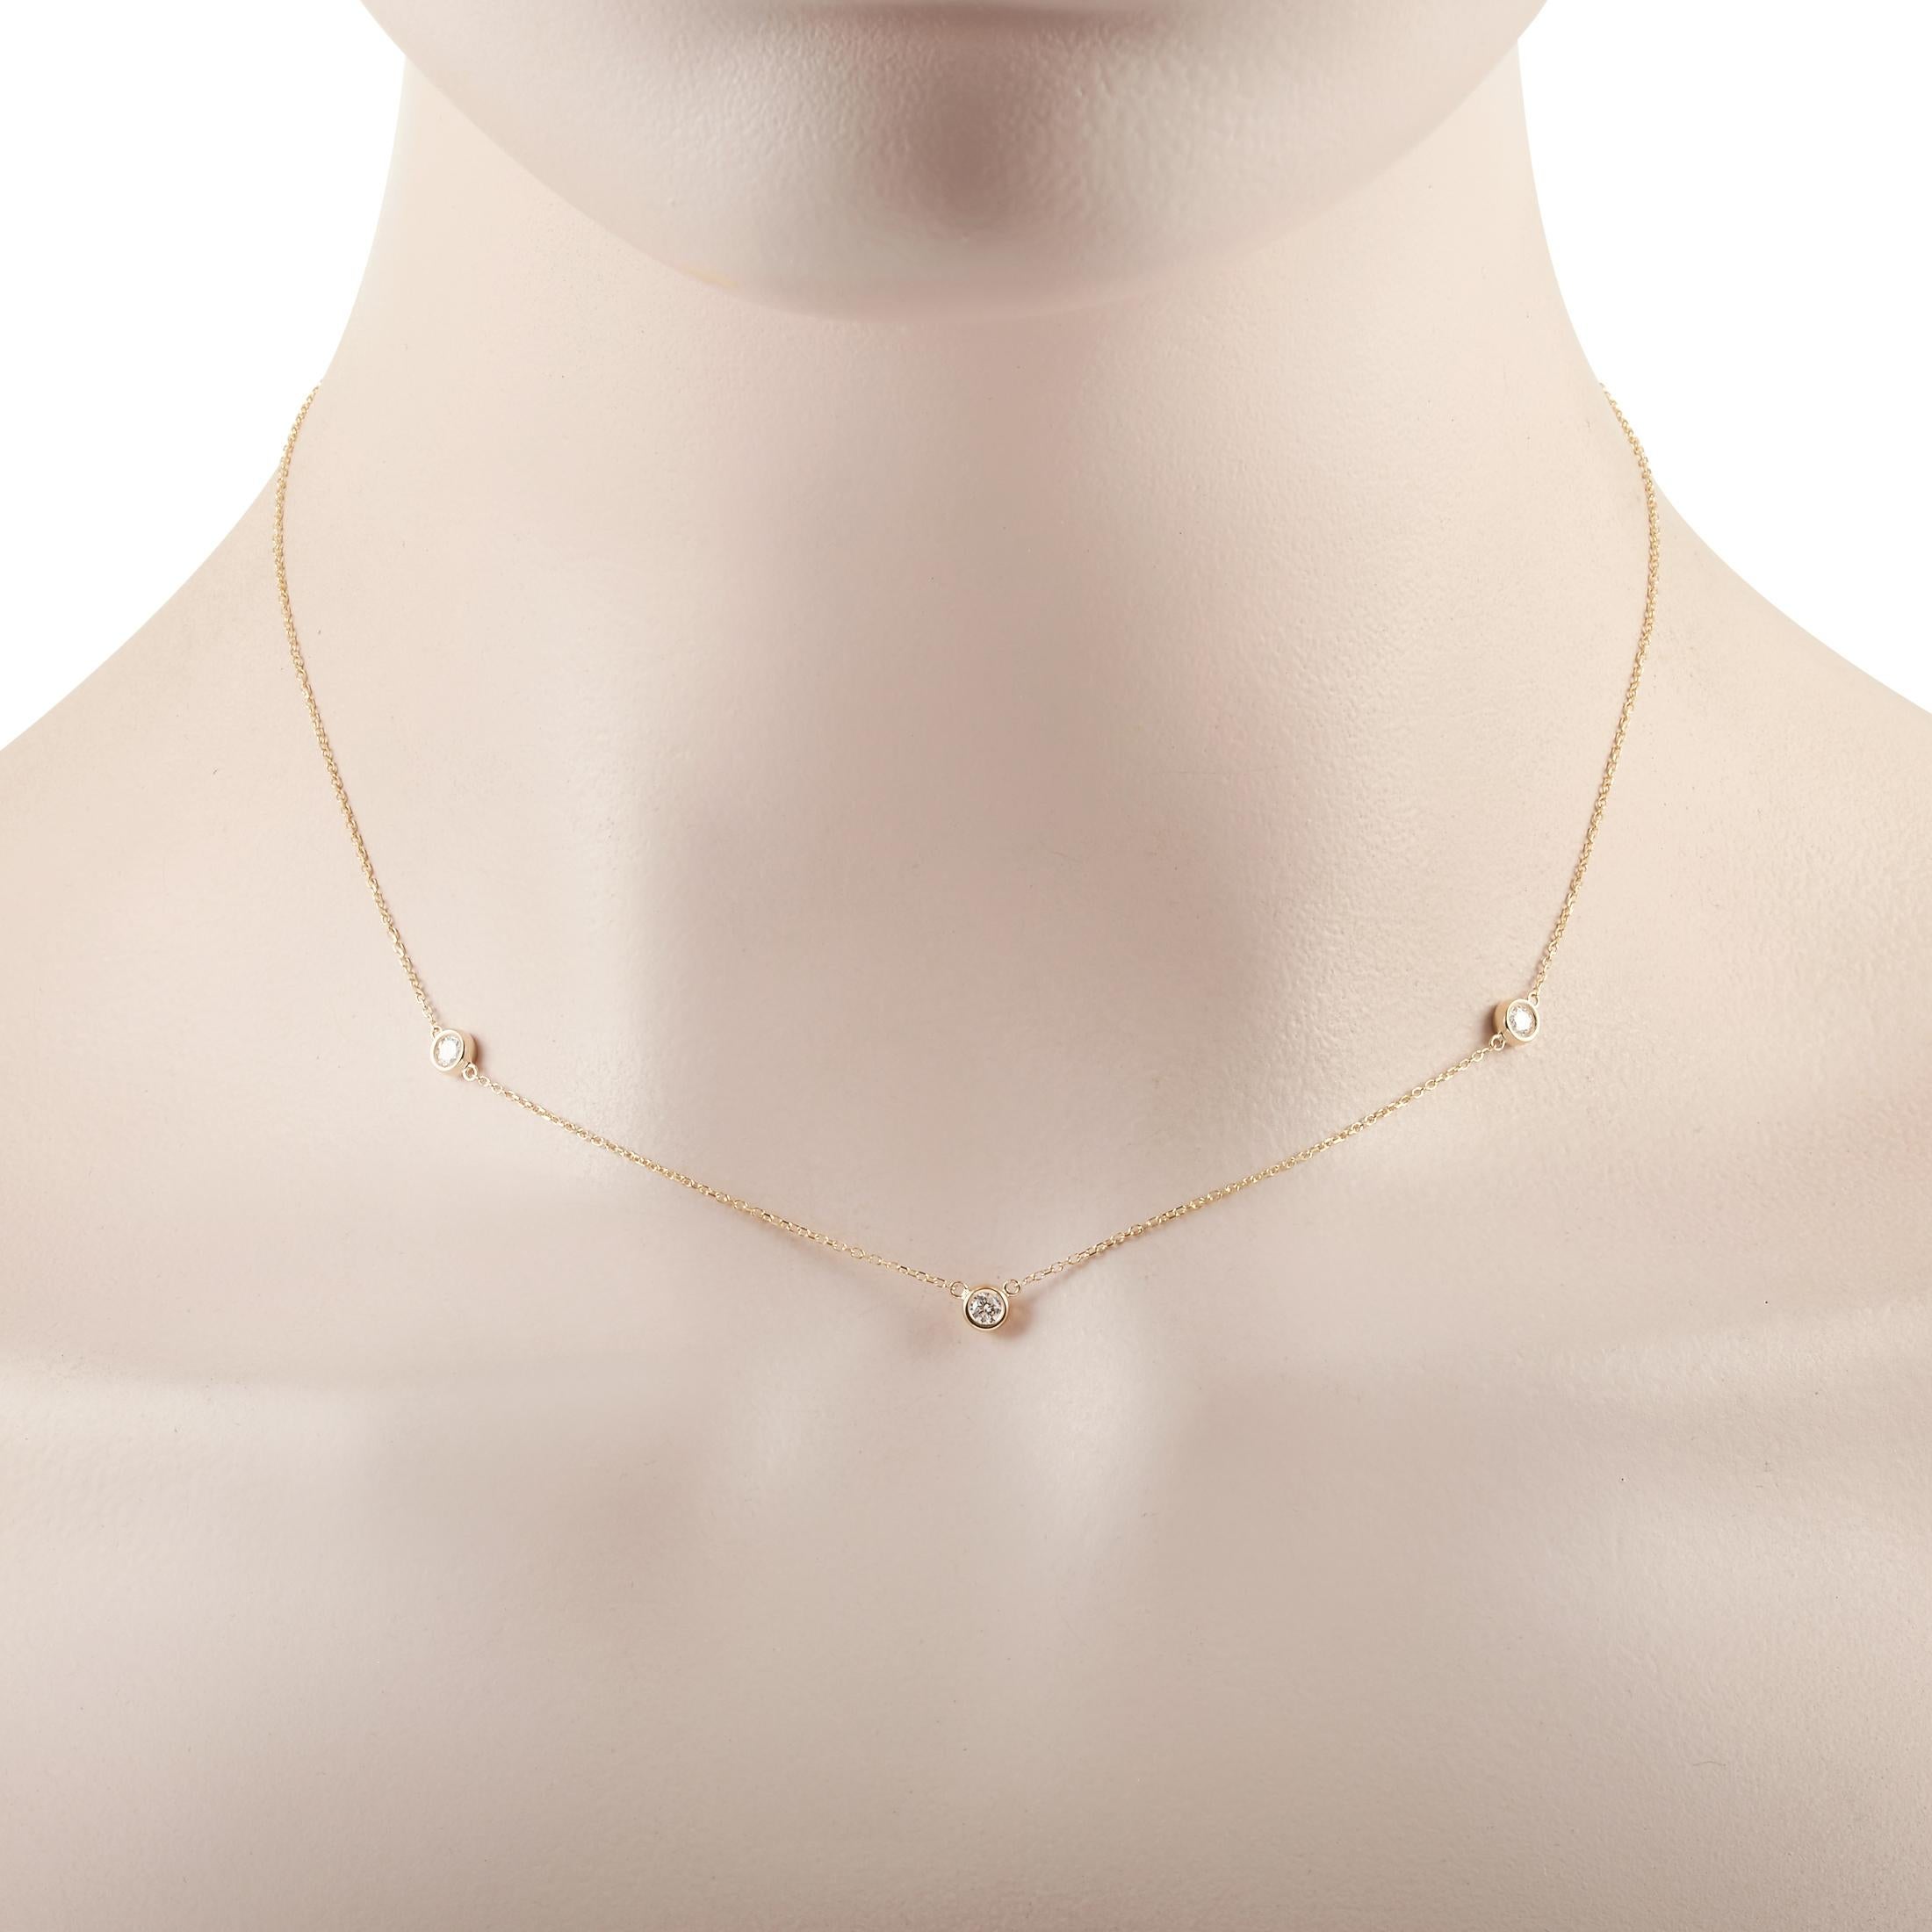 This LB Exclusive necklace is crafted from 14K yellow gold and weighs 1.6 grams, measuring 16” in length. The necklace is set with diamonds that total 0.25 carats.
 
 Offered in brand new condition, this jewelry piece includes a gift box.
